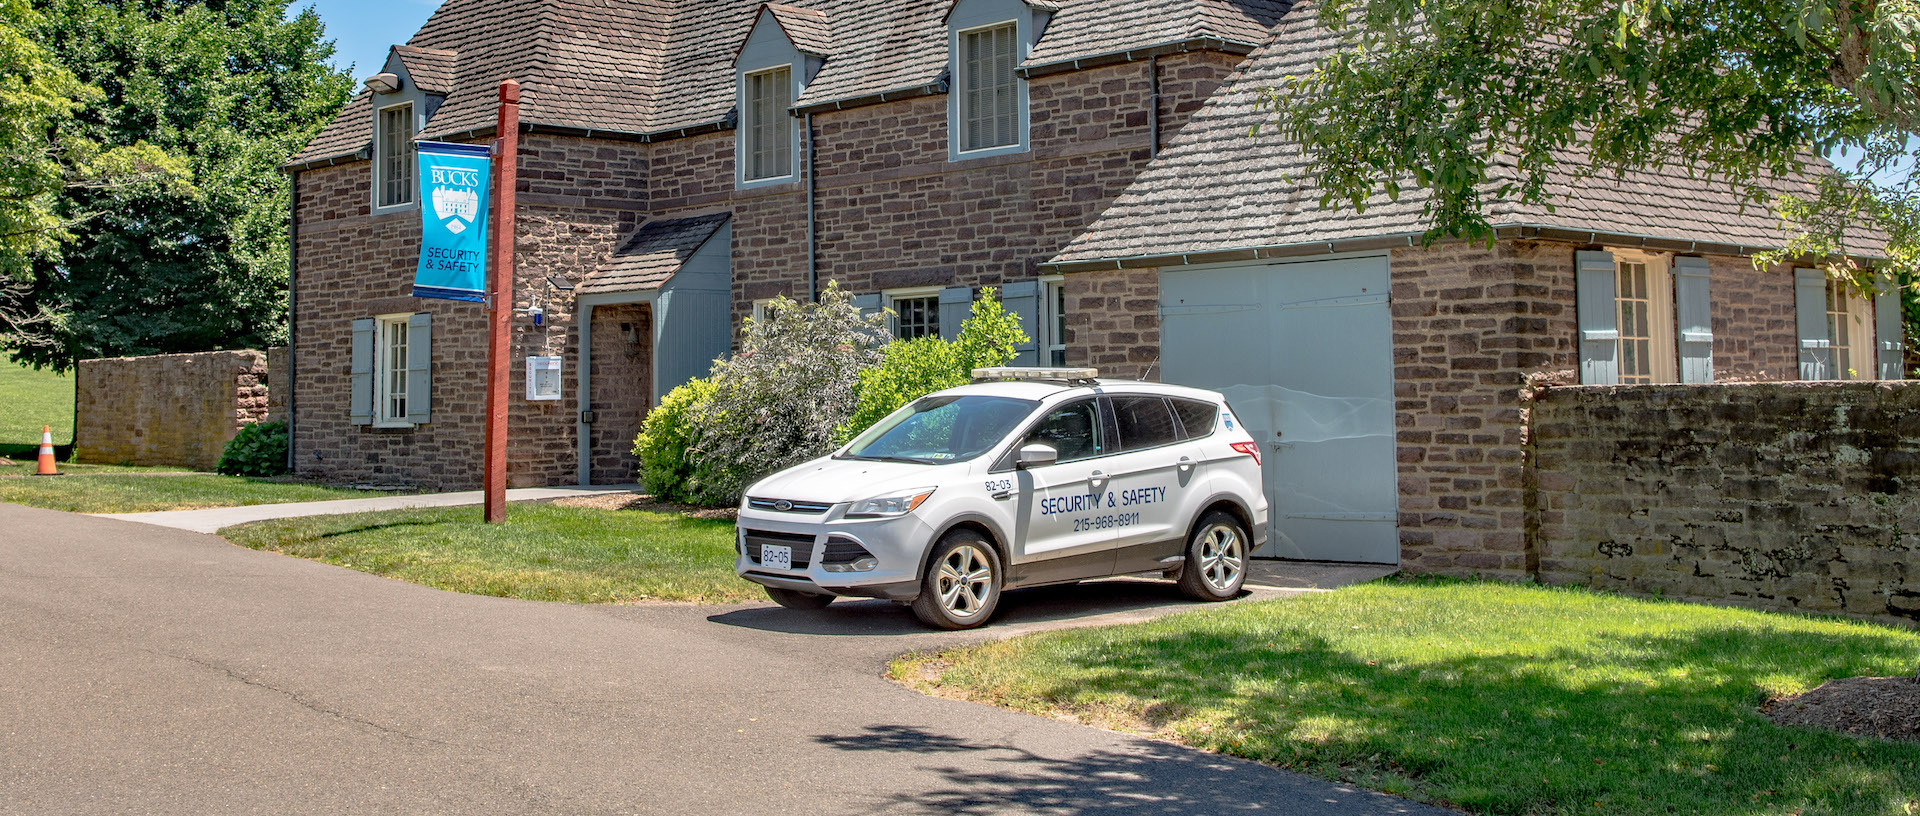 cottage with security vehicle parked out front